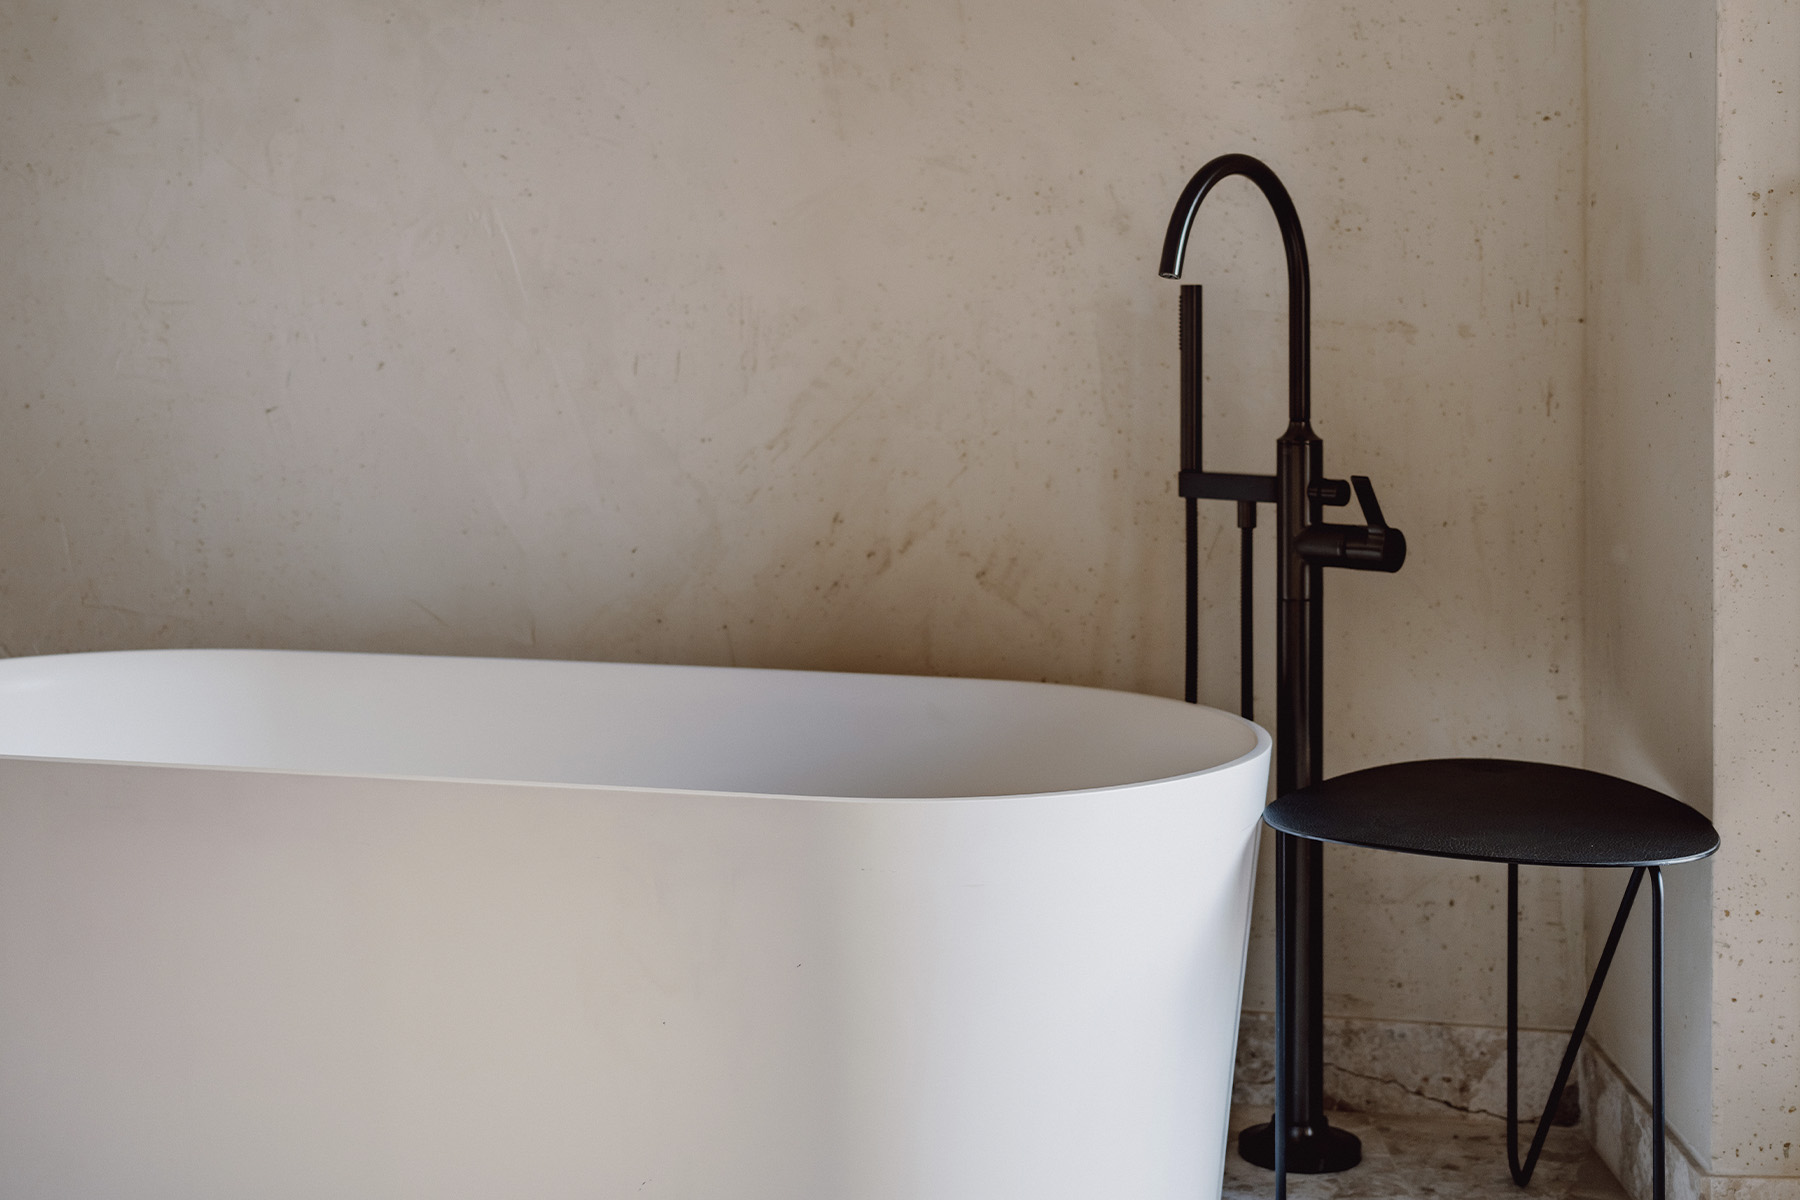 Water Delivery Choices for the Home - Kitchen & Bath Design News